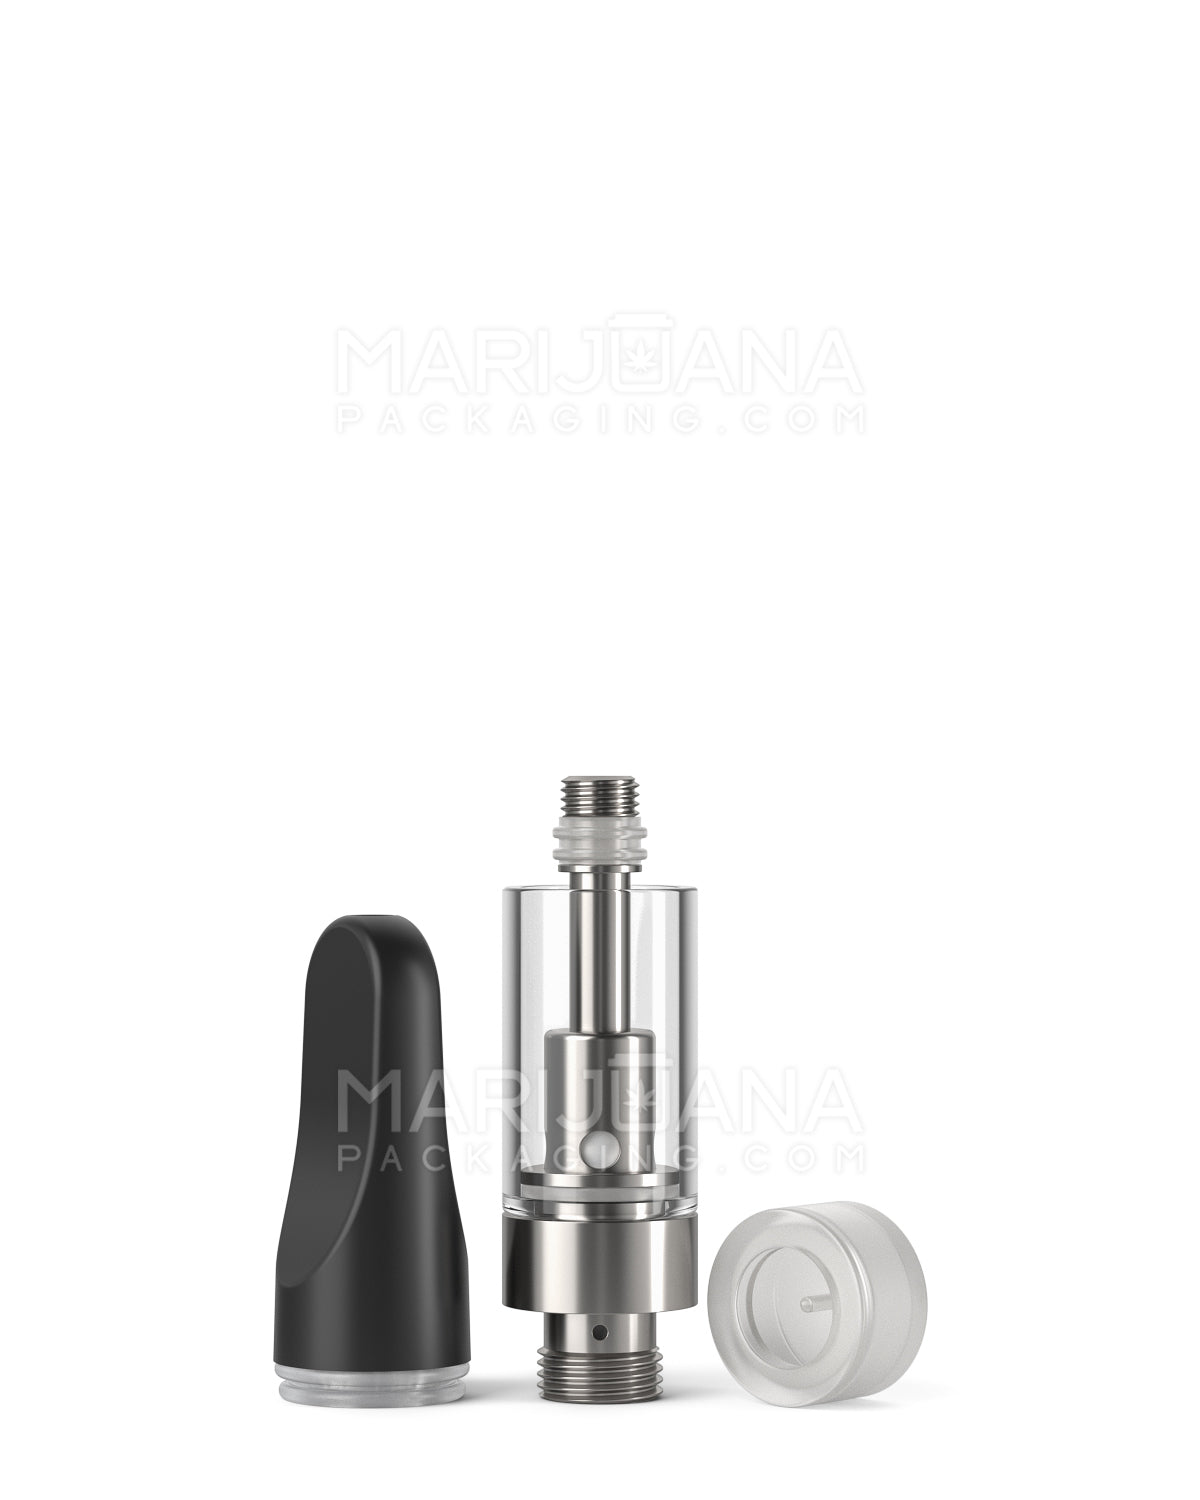 CCELL | Liquid6 Reactor Glass Vape Cartridge with Black Plastic Mouthpiece | 0.5mL - Screw On - 100 Count - 5